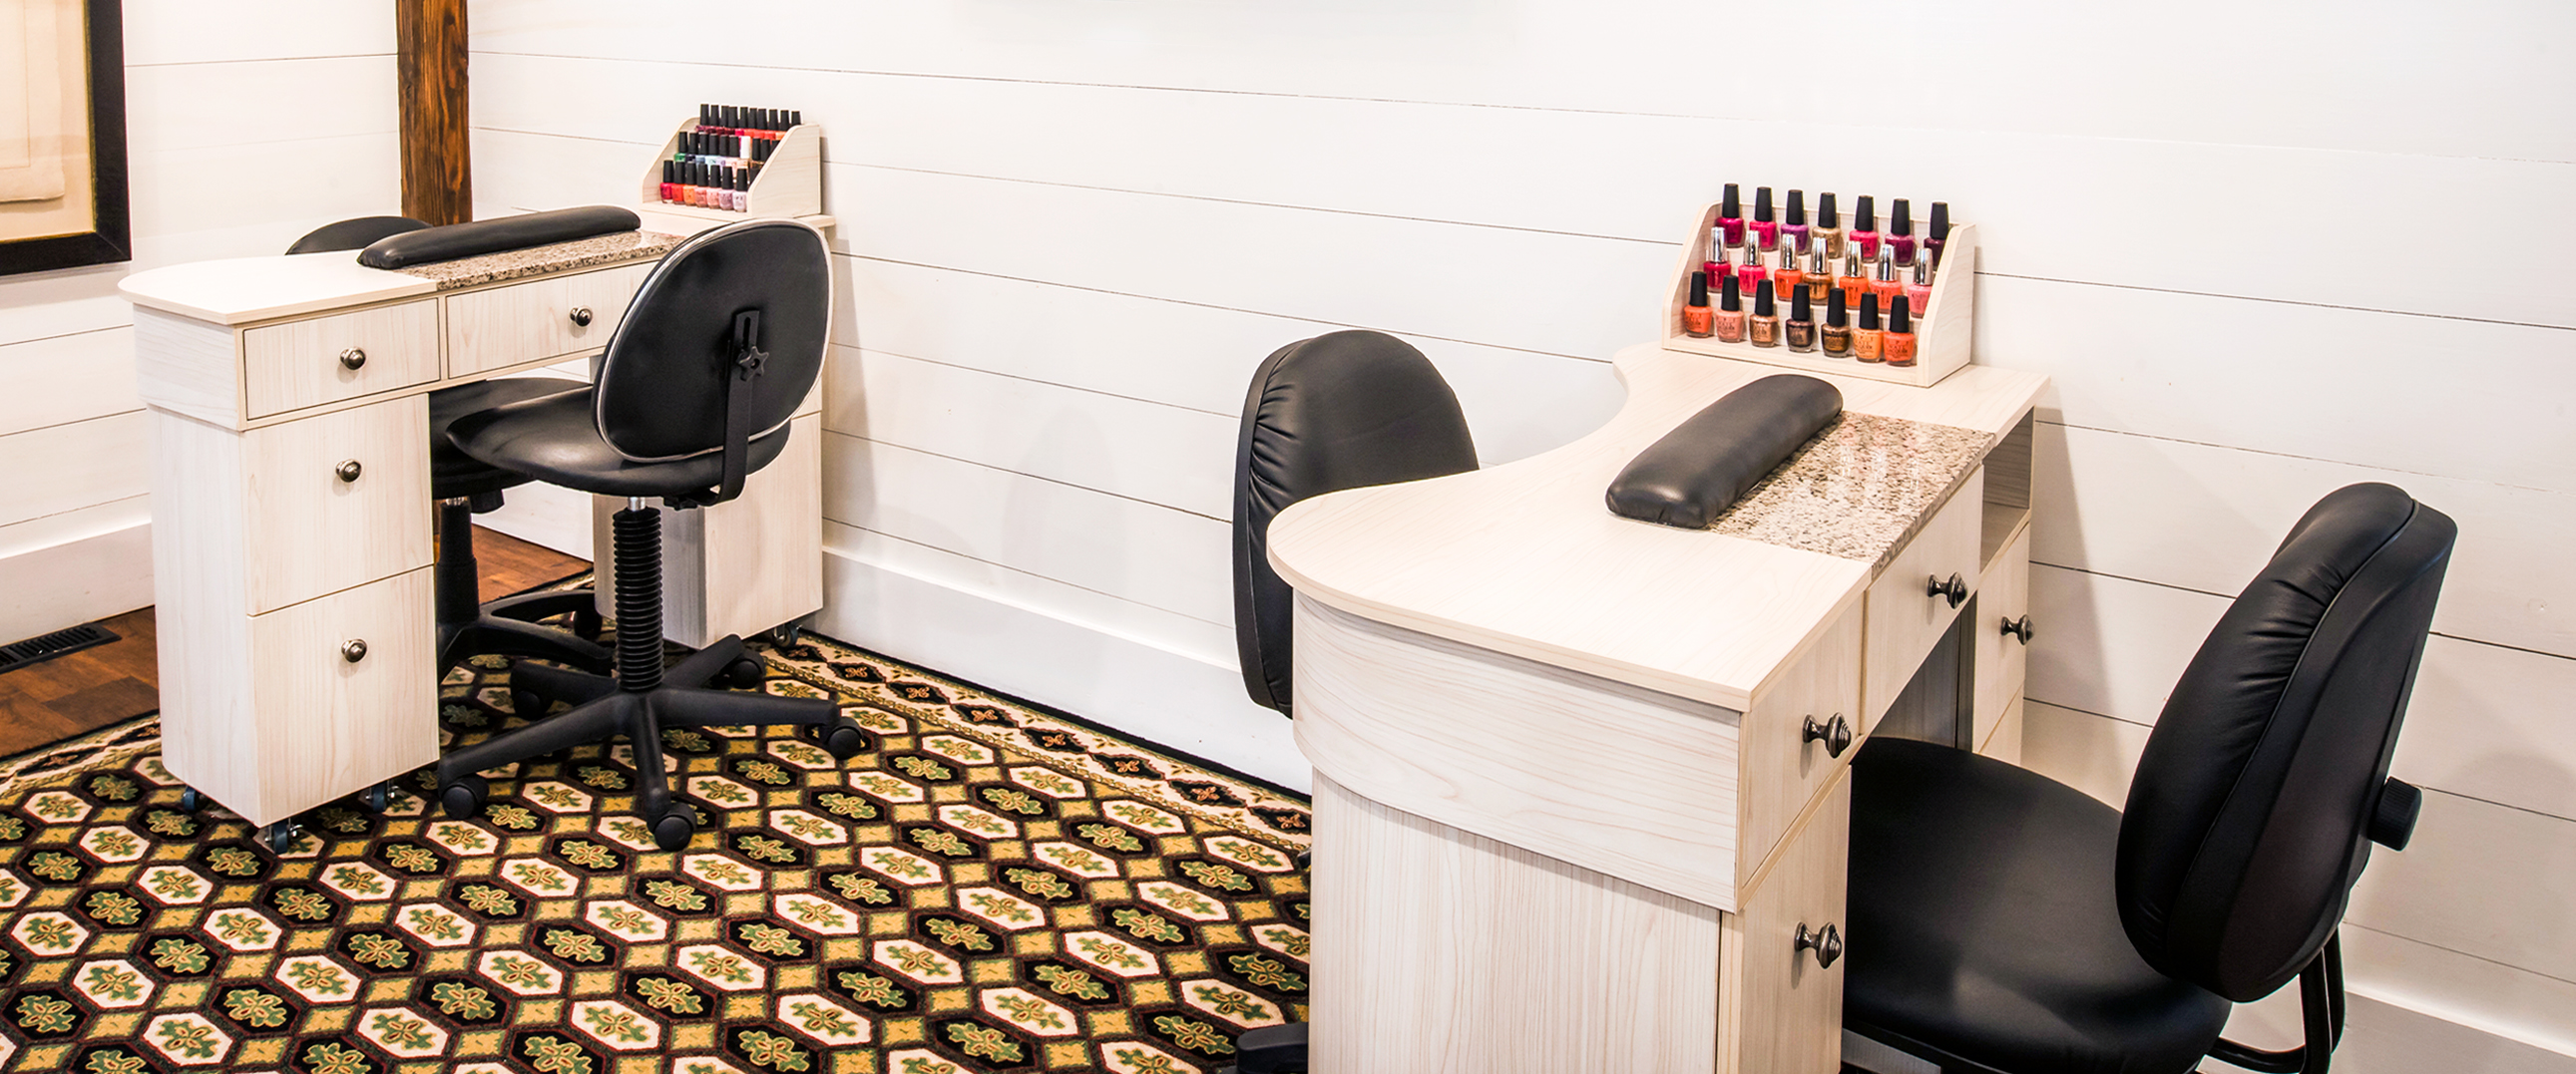 Have a seat and enjoy our classic or signature manicure.